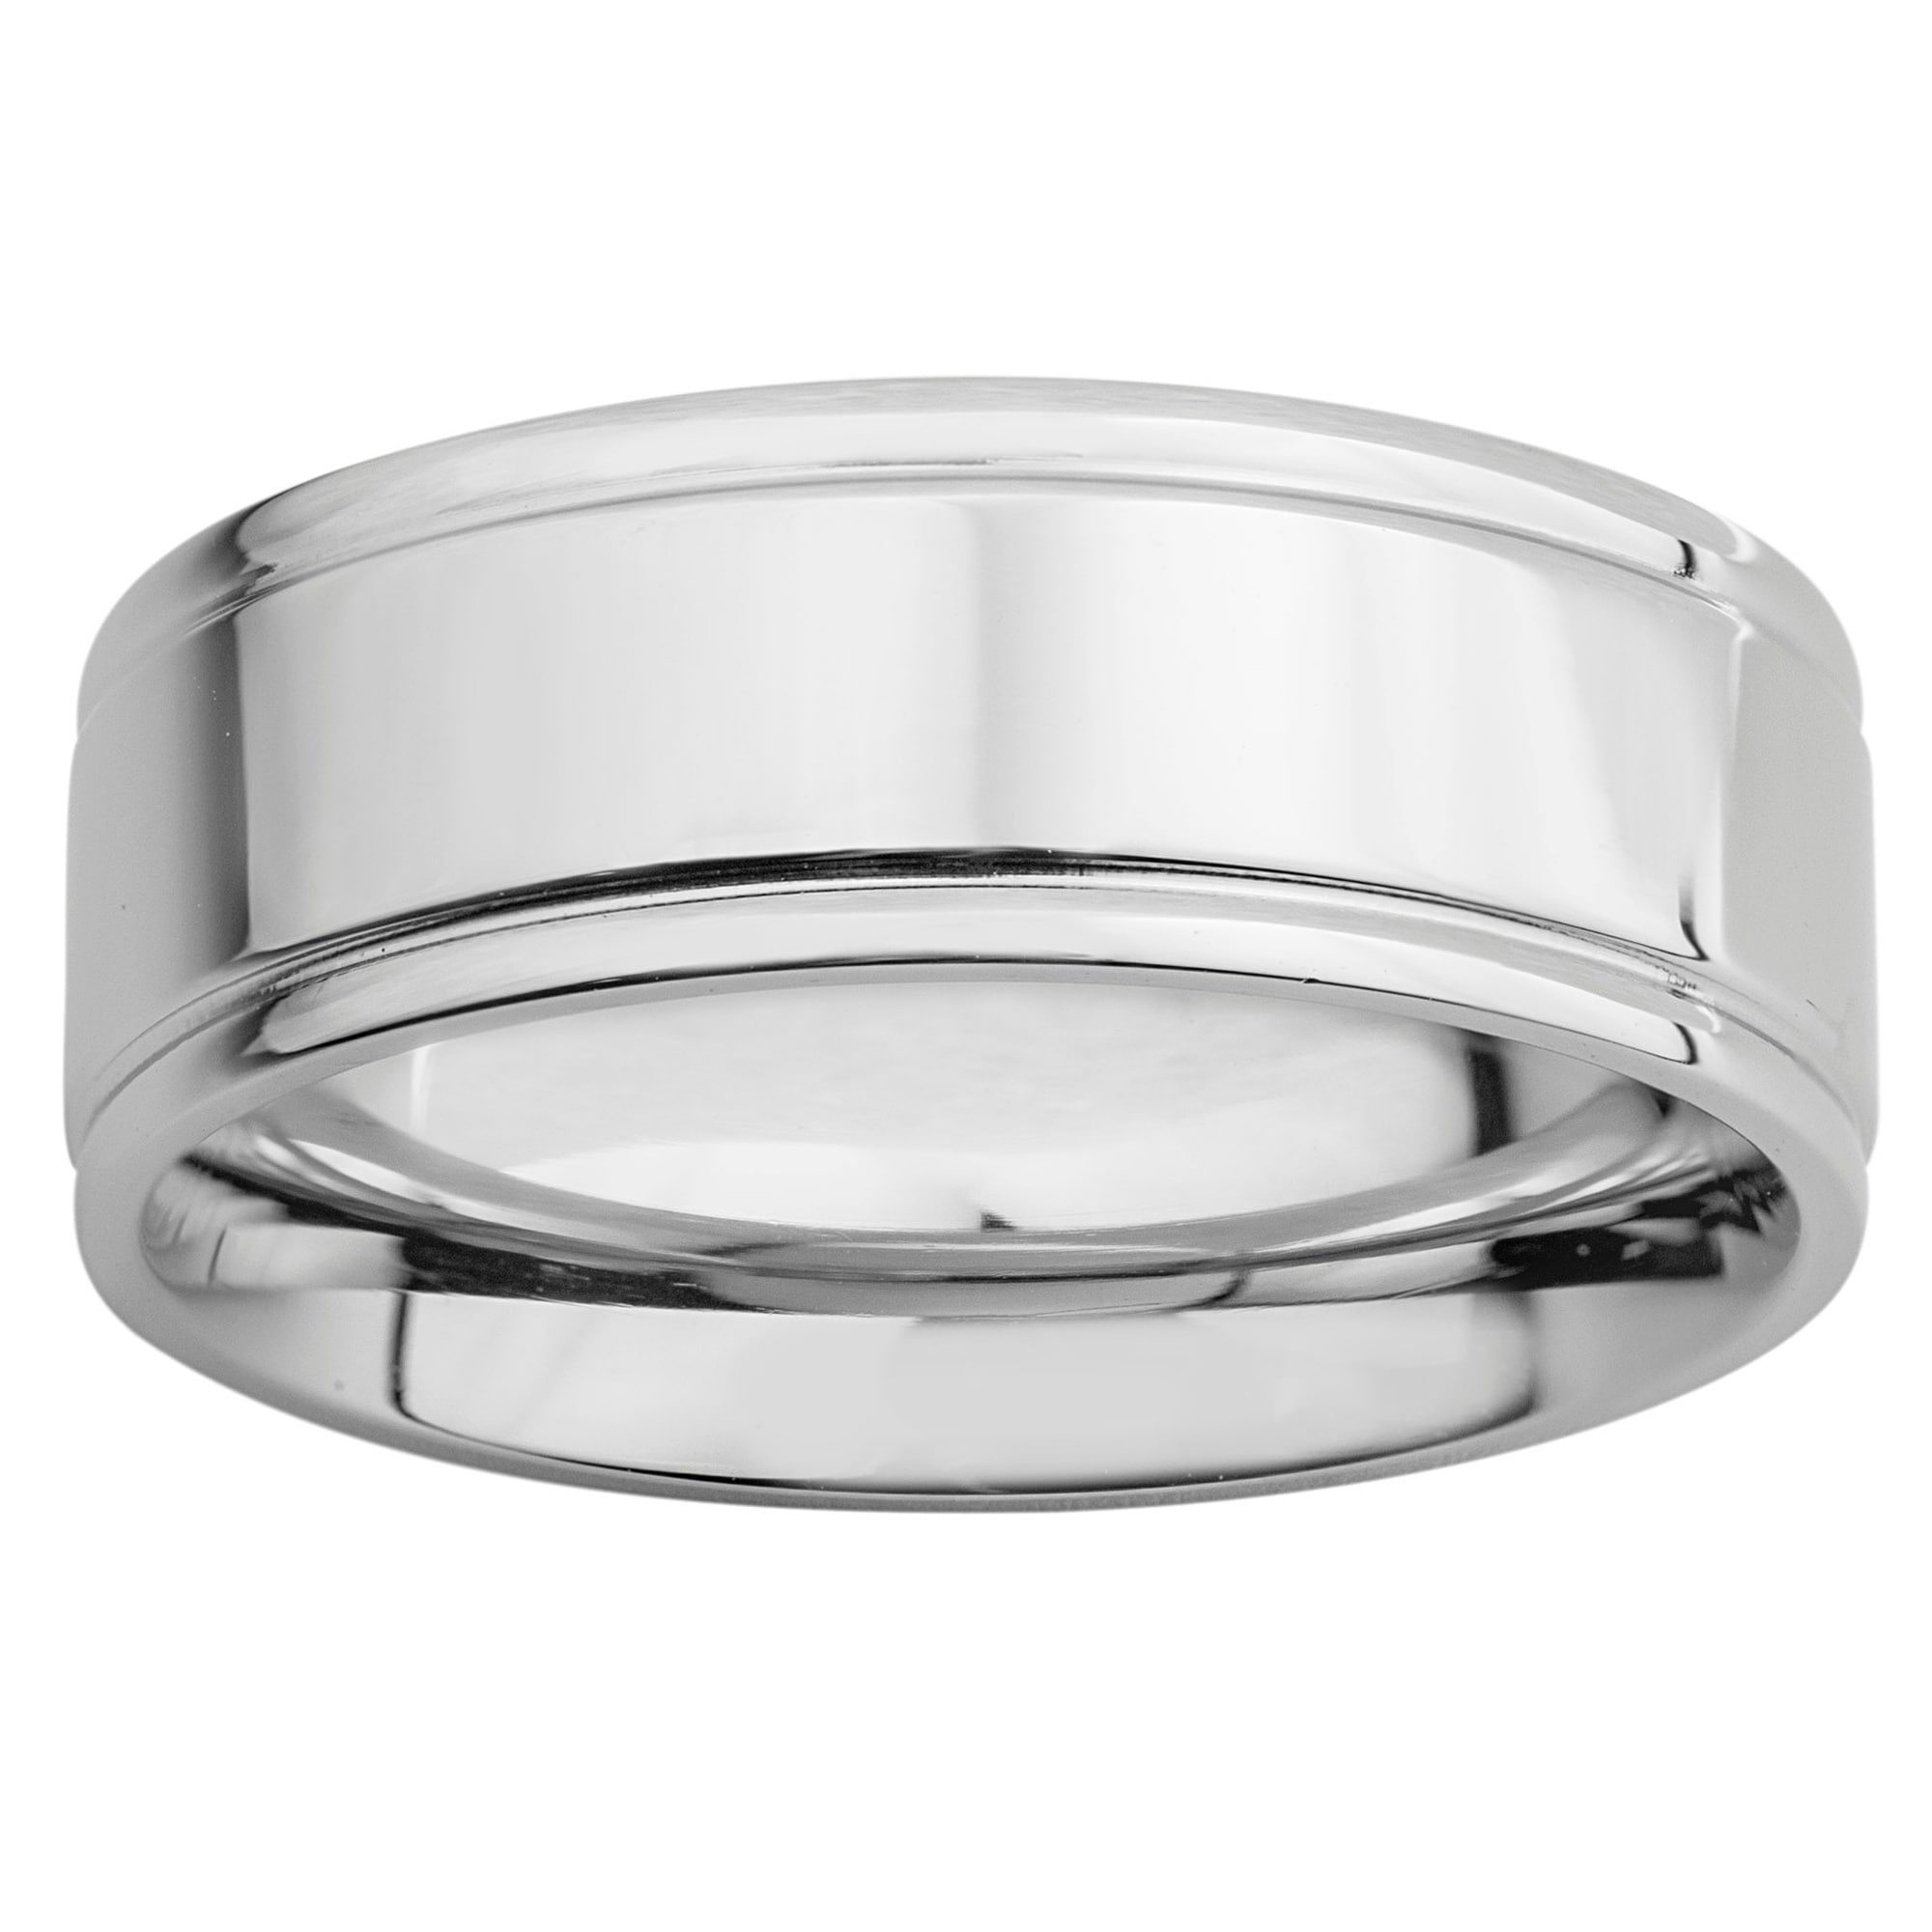 Bridal Stainless Steel Polished Grooved Ring 